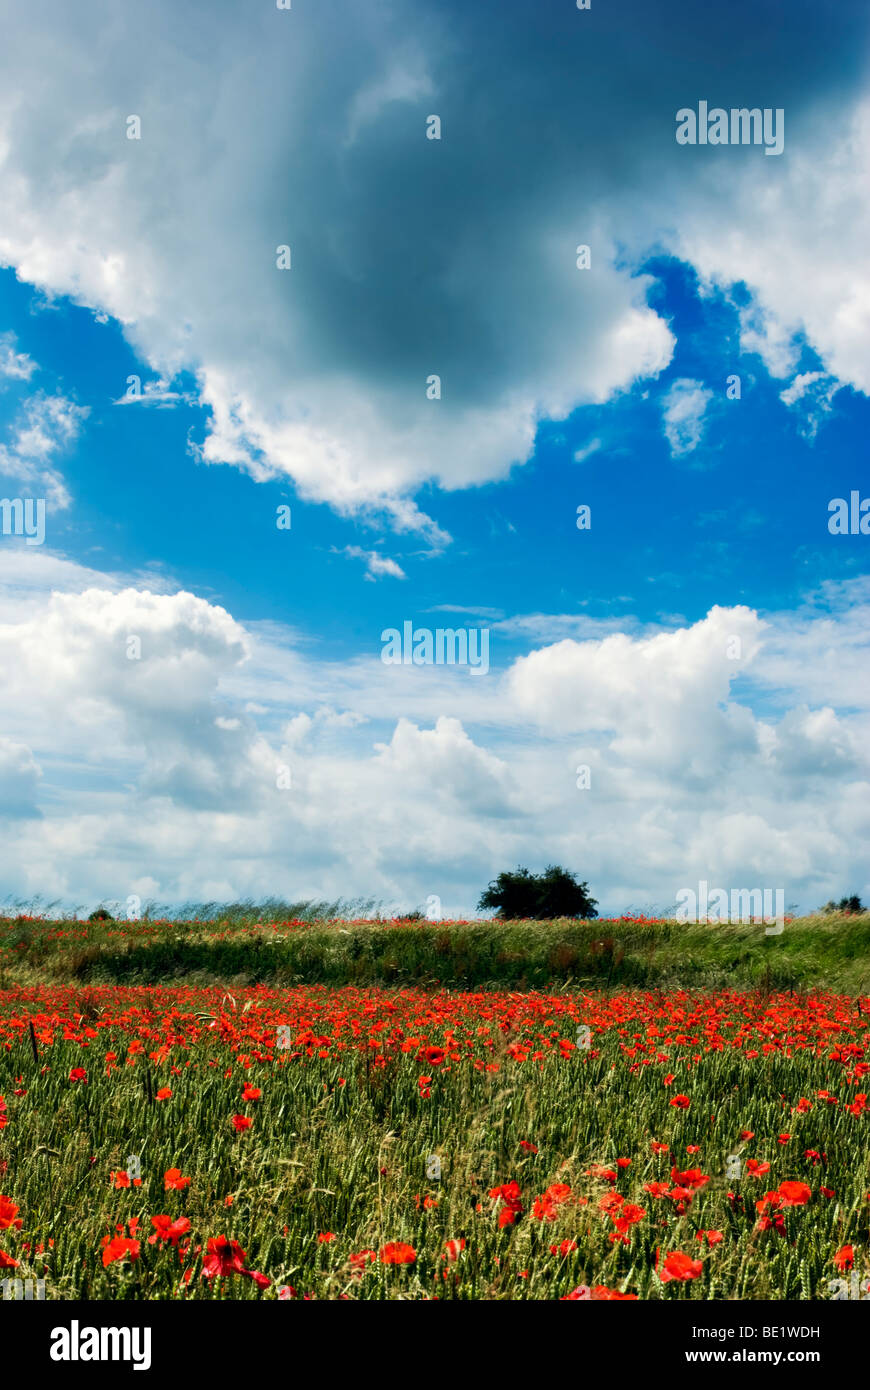 Poppy field in summer with blue sky. Stock Photo